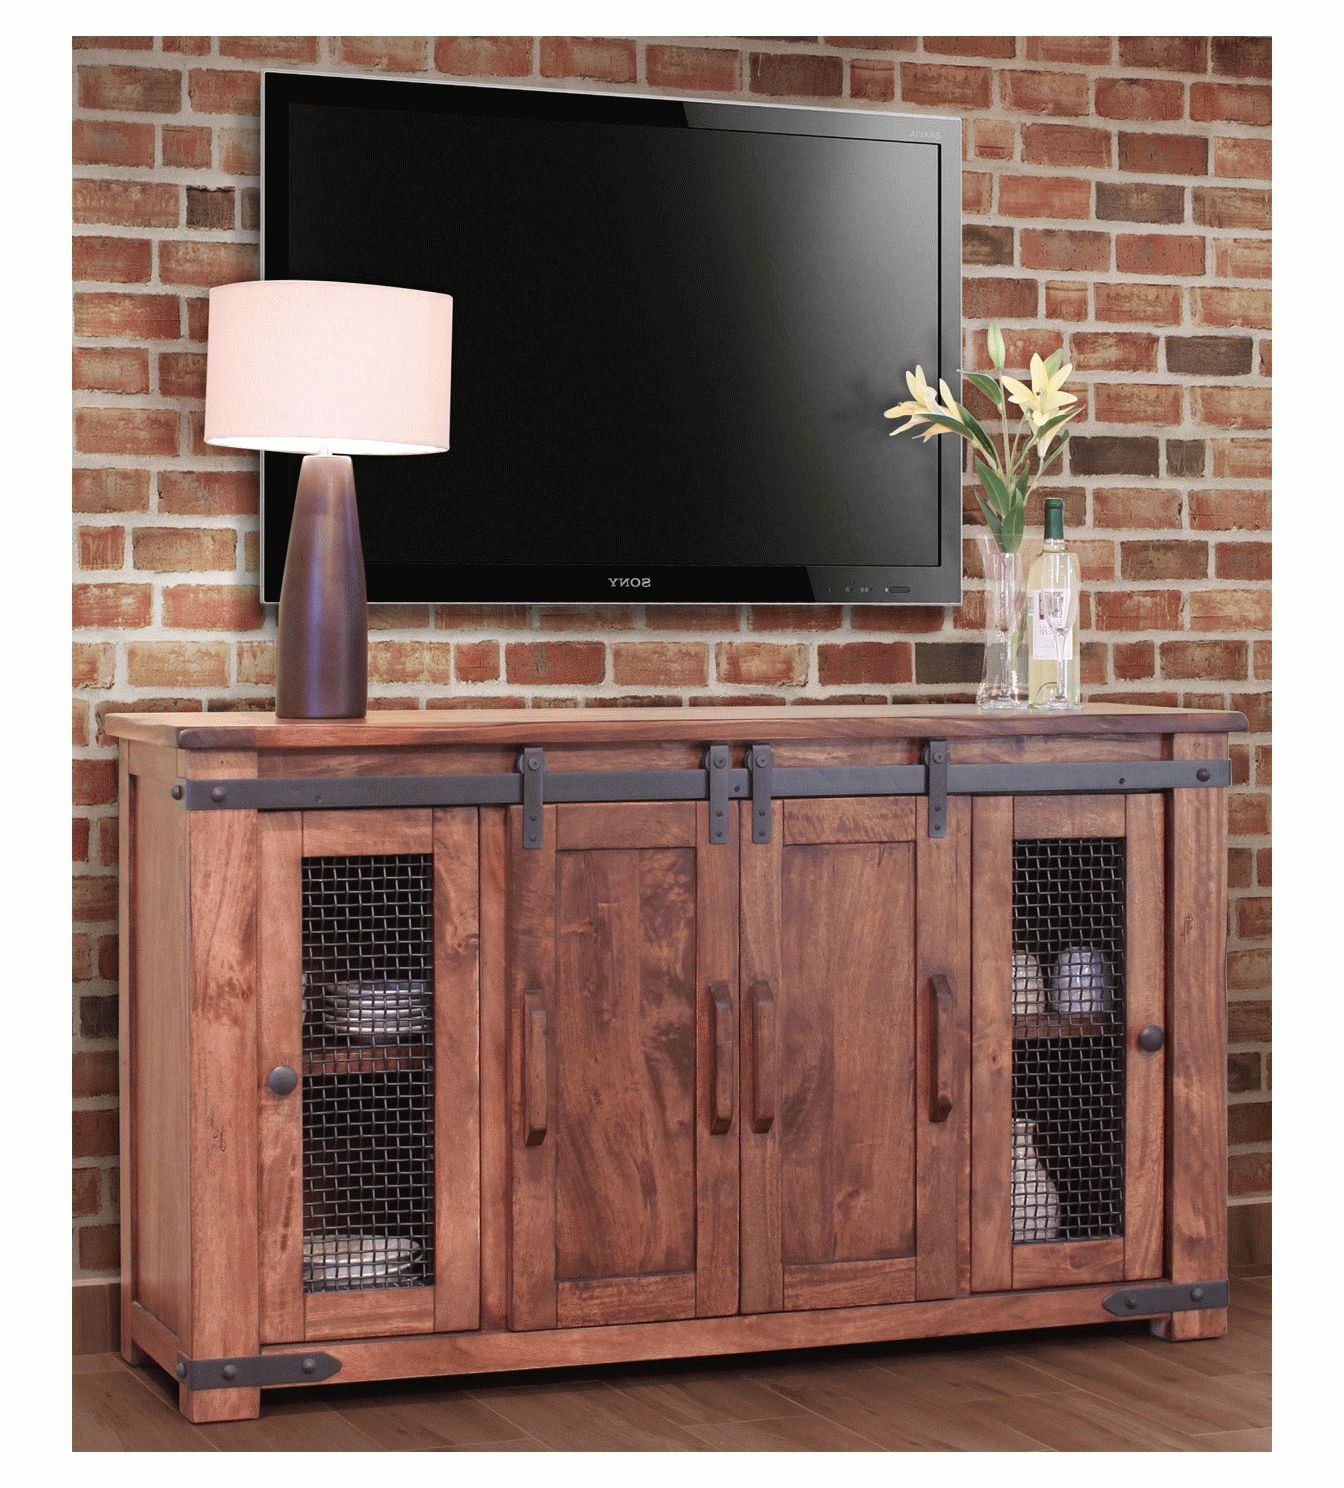 Rustic Barn Door Tv Stand, Barn Door Tv Stand, Barn Door Tv Console Throughout Rustic Pine Tv Cabinets (Gallery 2 of 20)